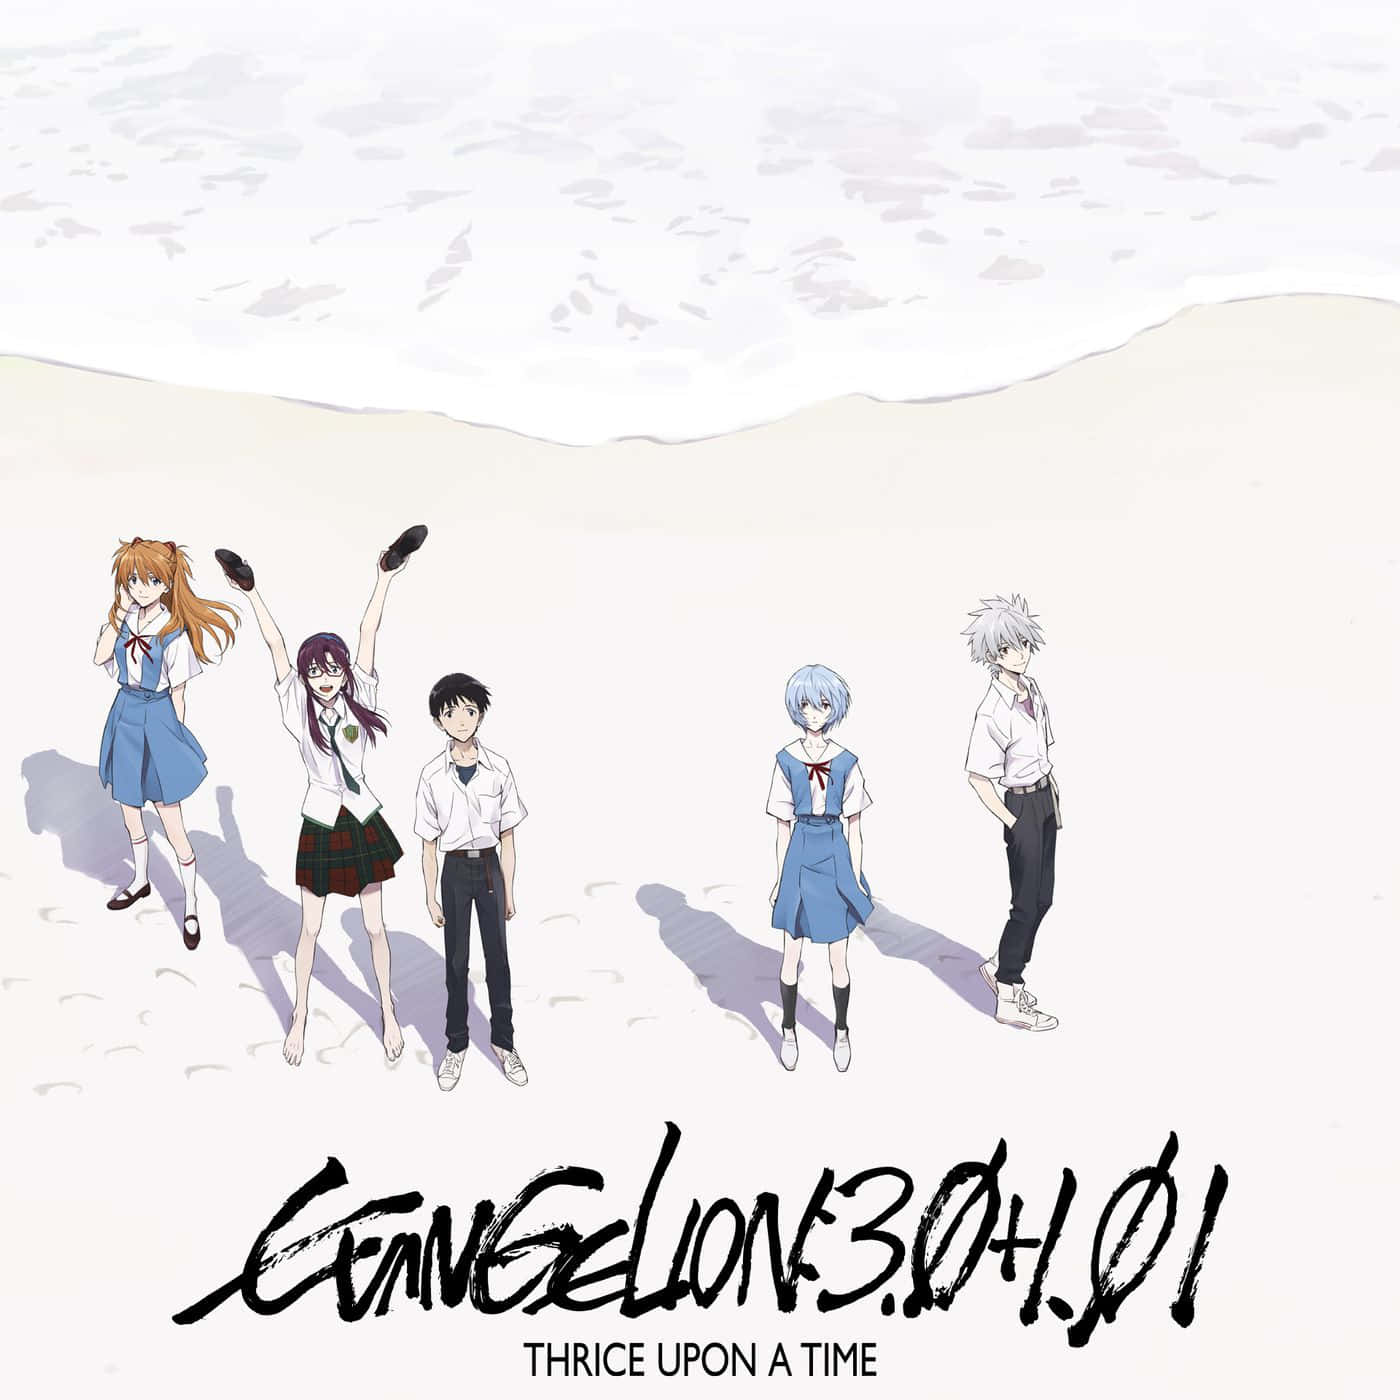 Evangelion 30 10 Characters By The Sea Wallpaper